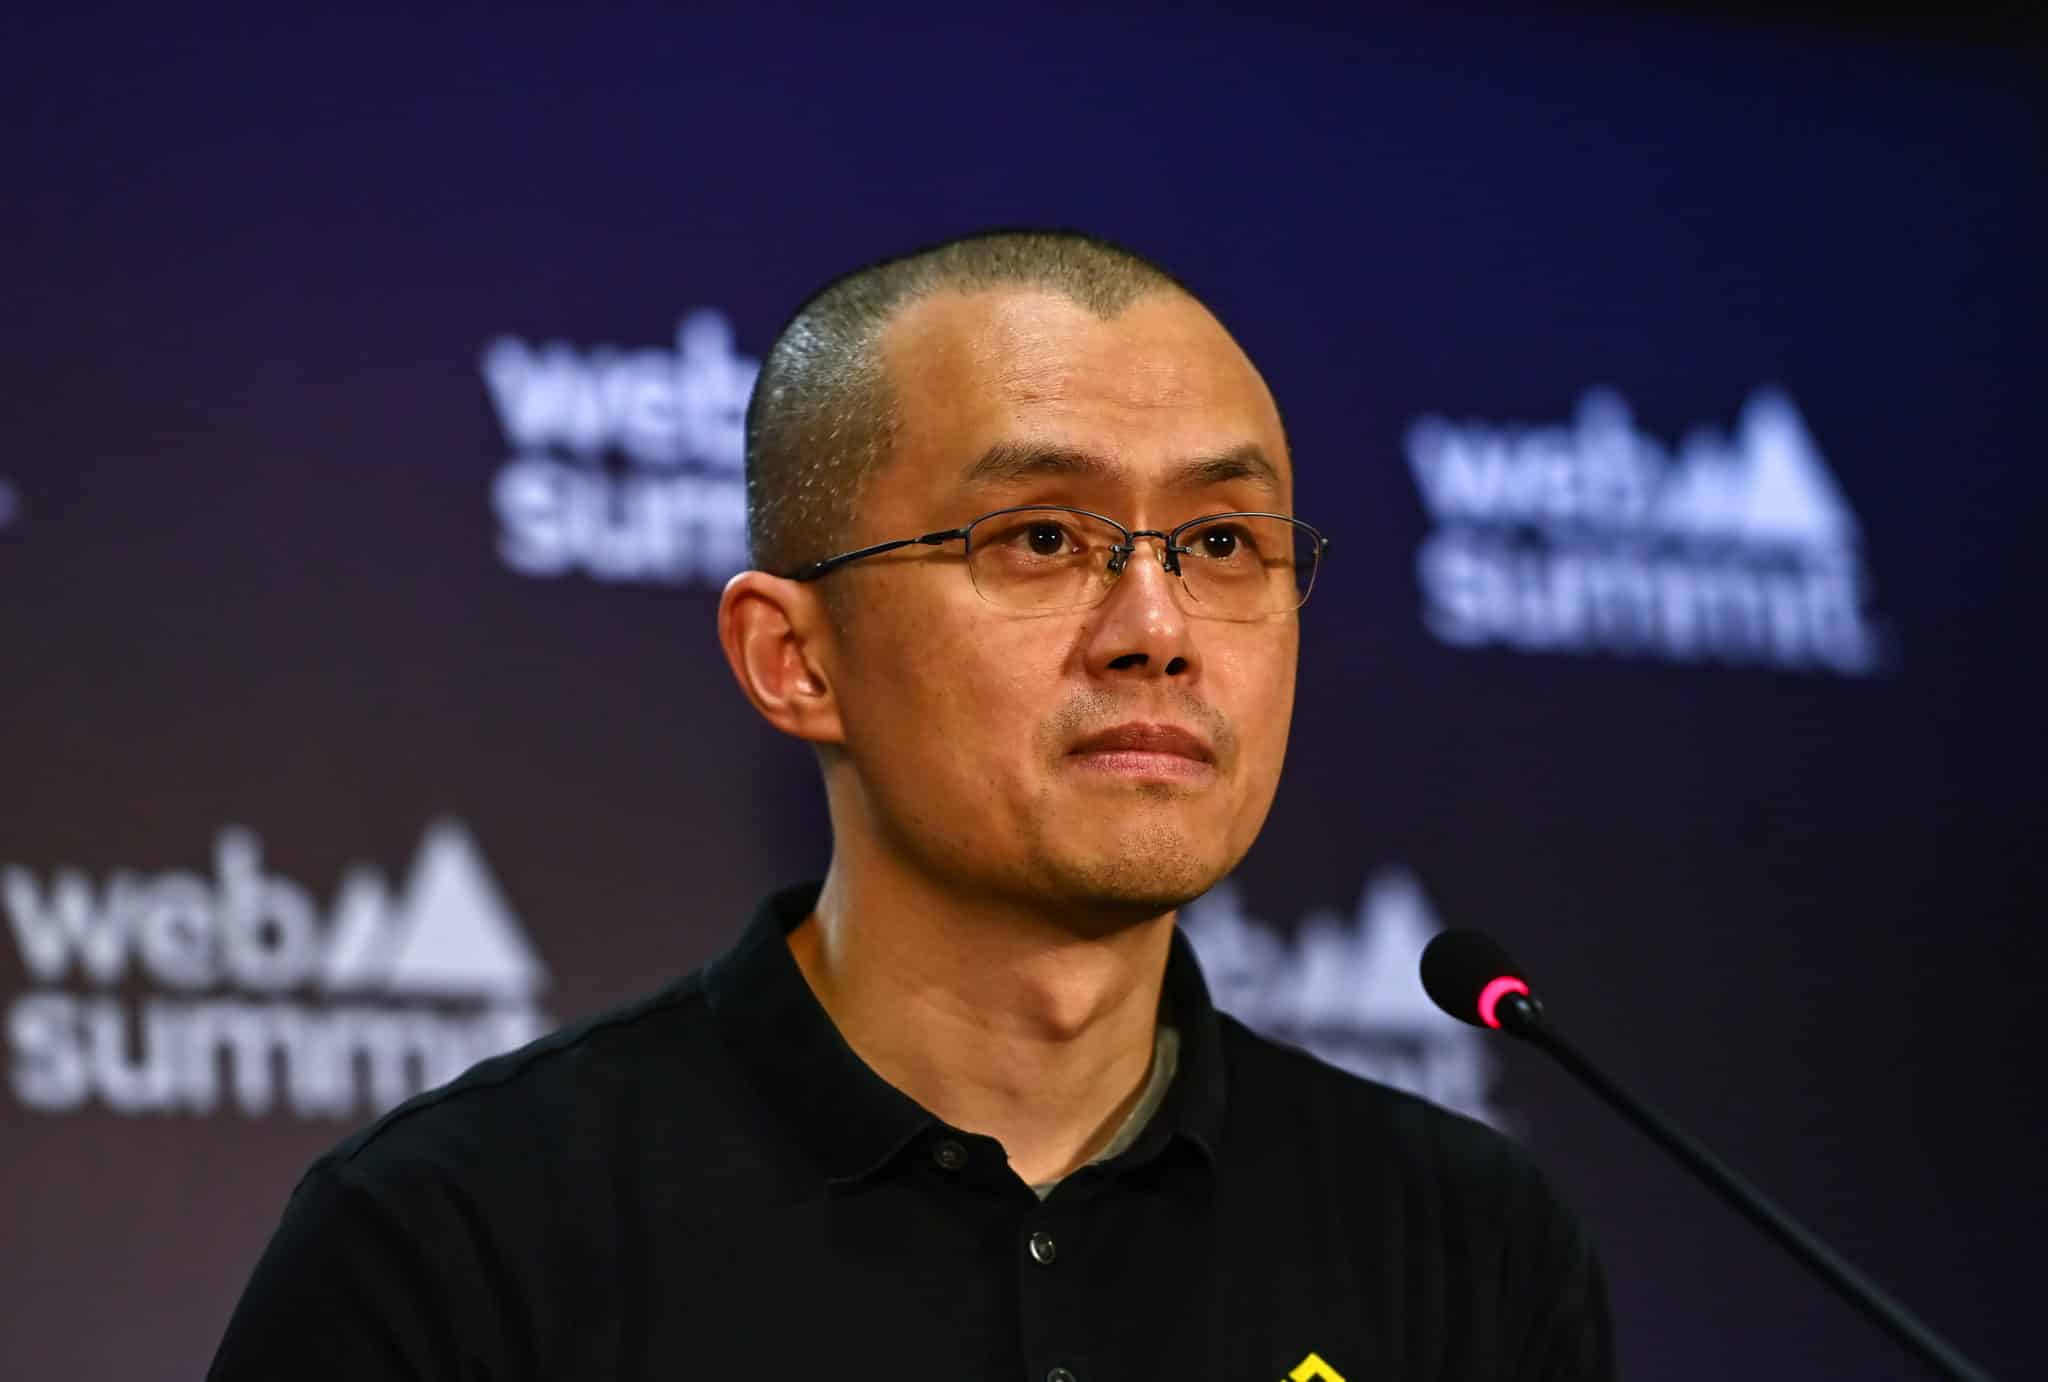 SEC sues Binance and CEO Changpeng Zhao for U.S. securities violations